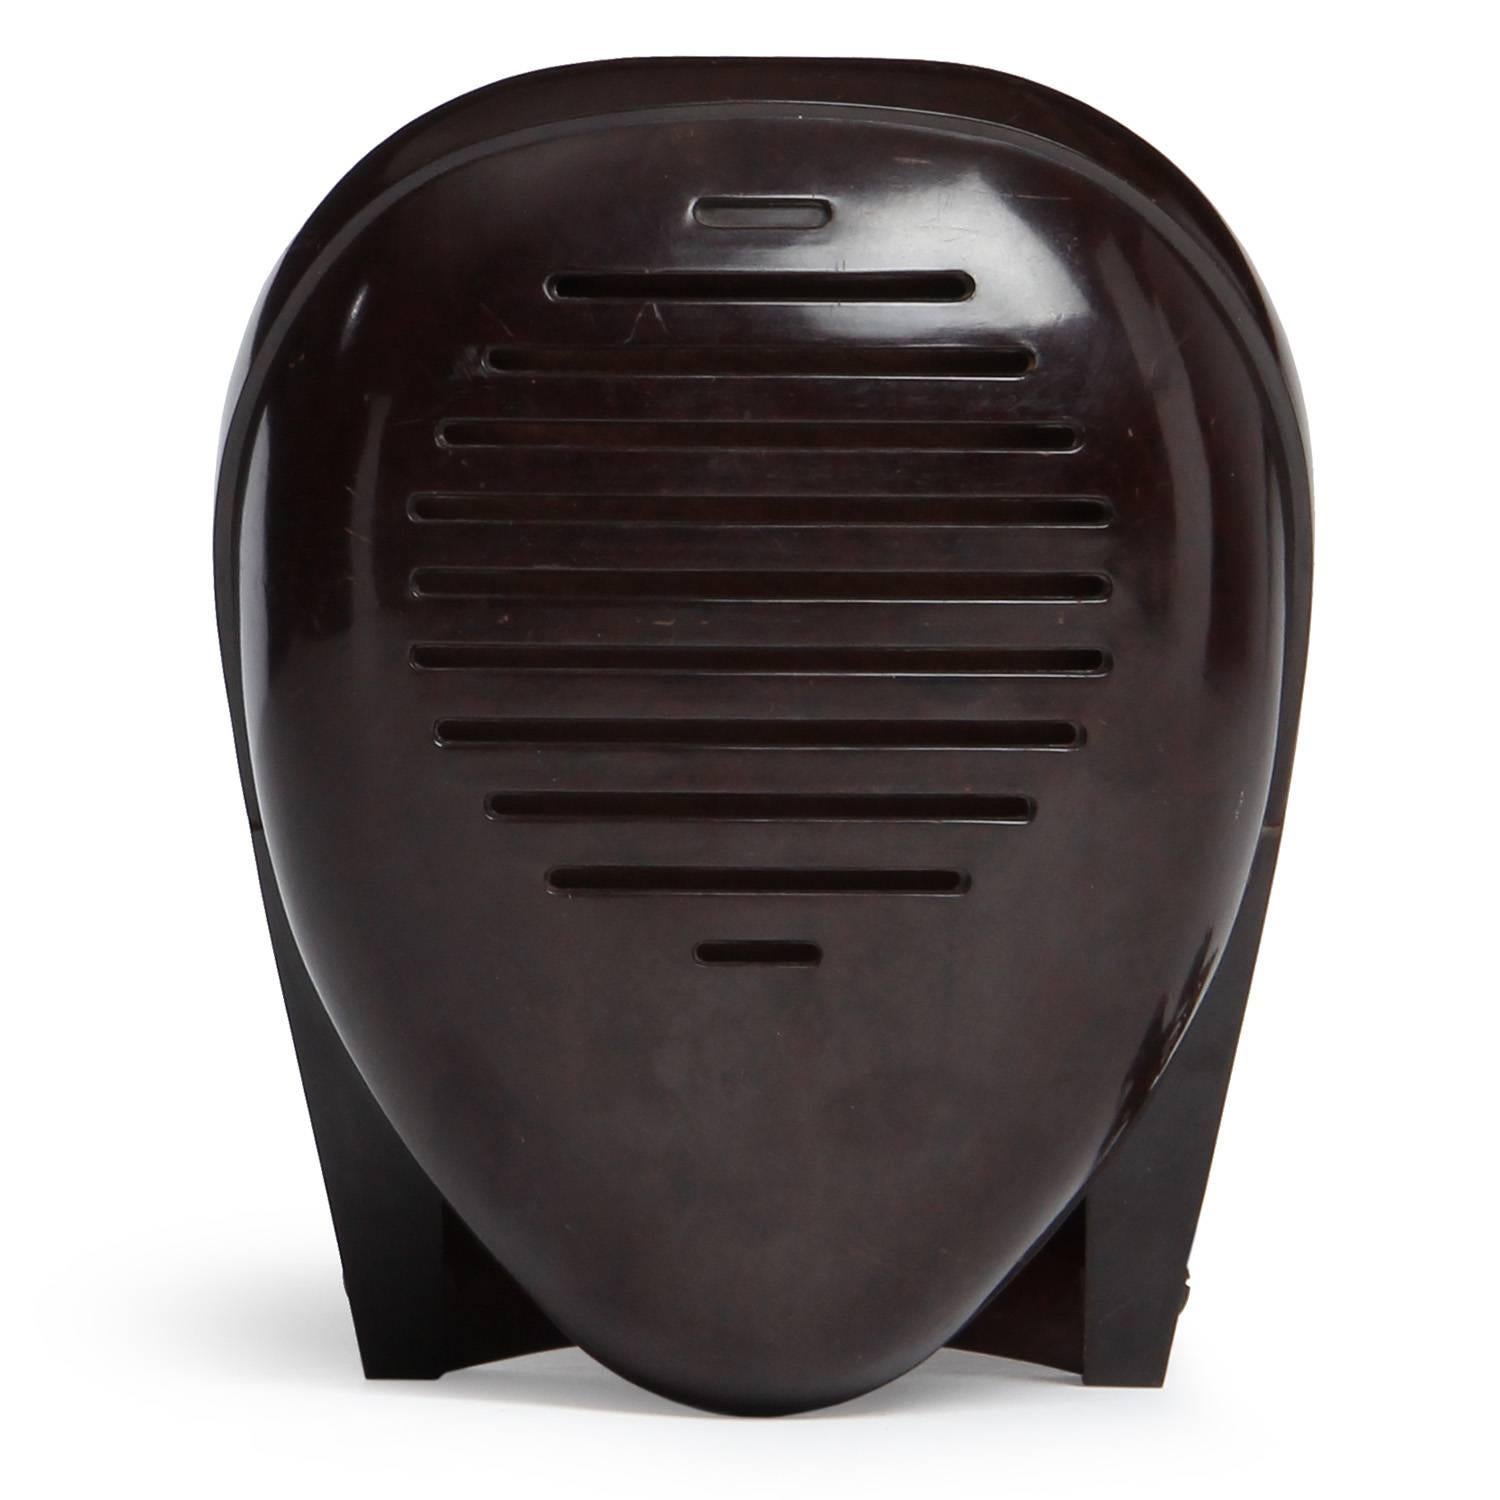 A highly expressive baby monitor designed by the artist Isamu Noguchi in bakelite, its modernist form evocative of an abstracted human head and traditional Japanese Kendo masks.